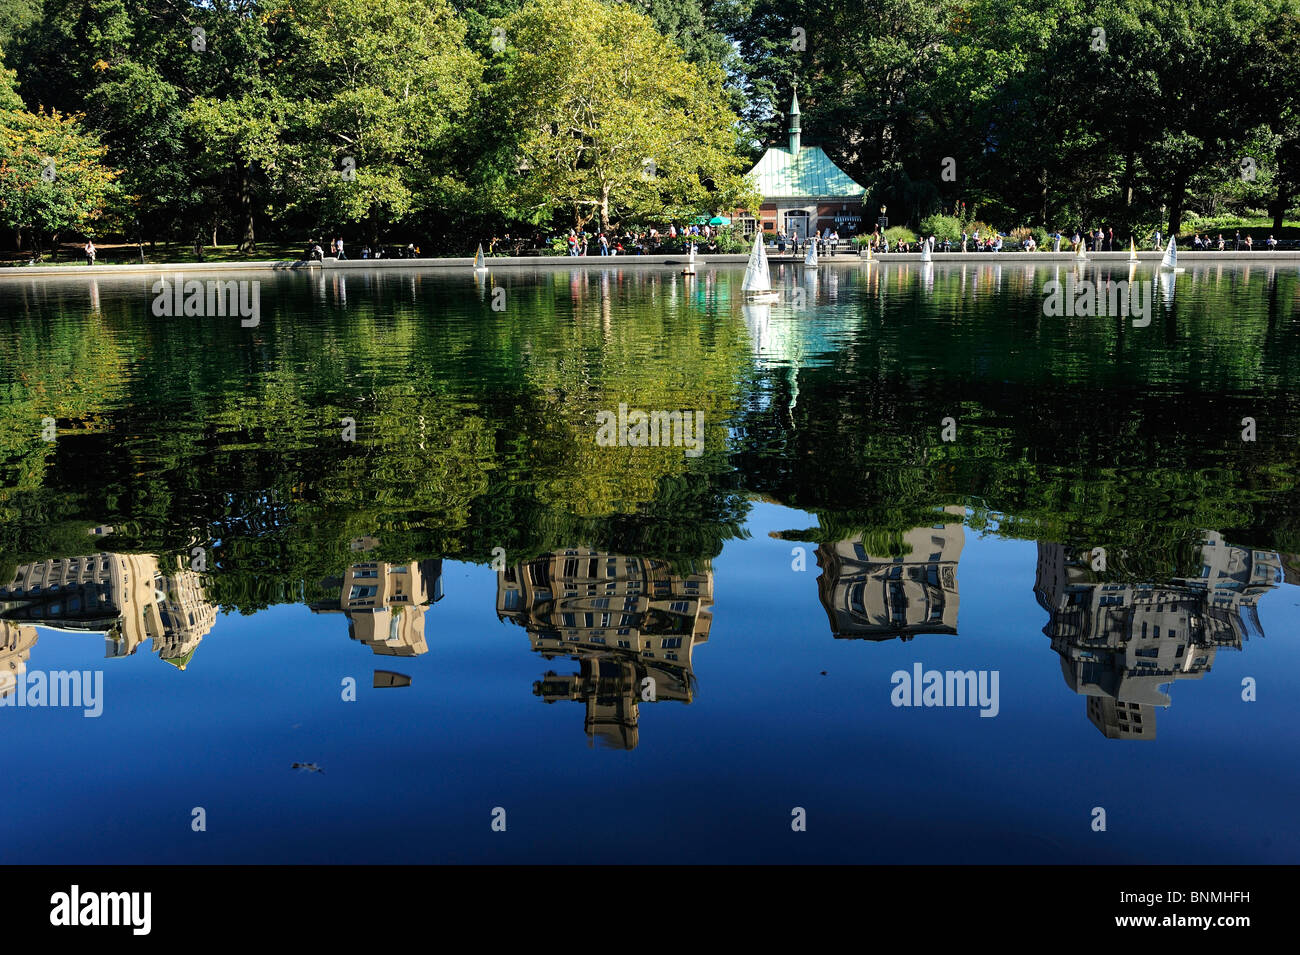 Conservation Water Pond reflection Central Park New York City City Upper East Side Manhattan New York USA America North America Stock Photo